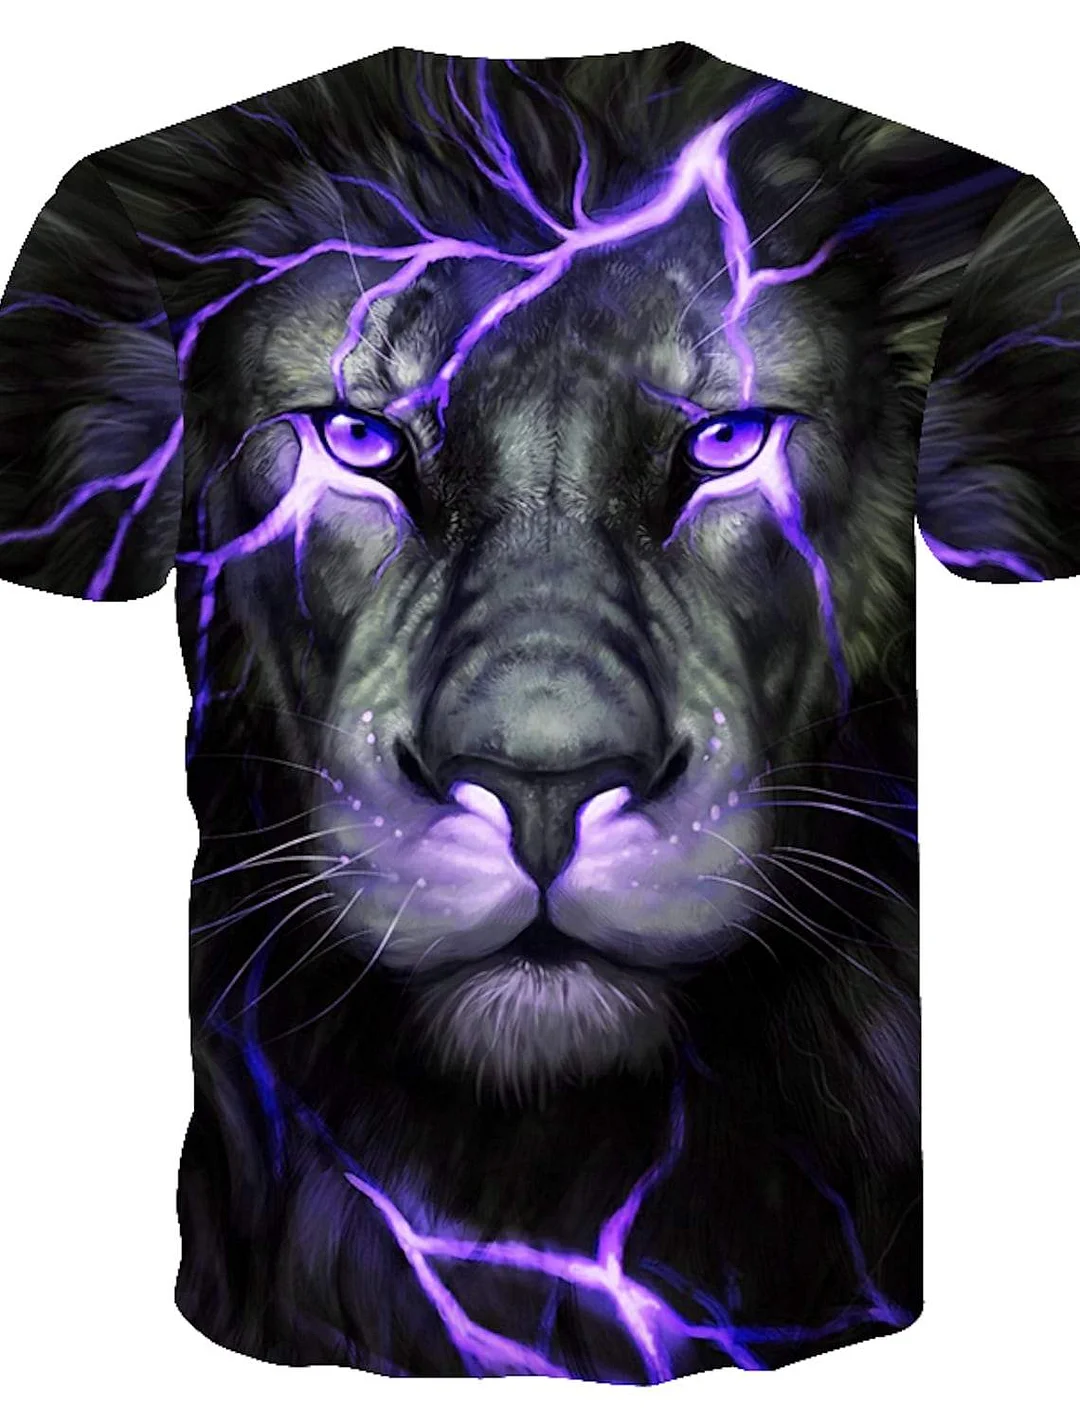 Men's Tee T-Shirt 3D Print Graphic Lion Animal Plus Size Print Short Sleeve Causal Tops Streetwear Exaggerated